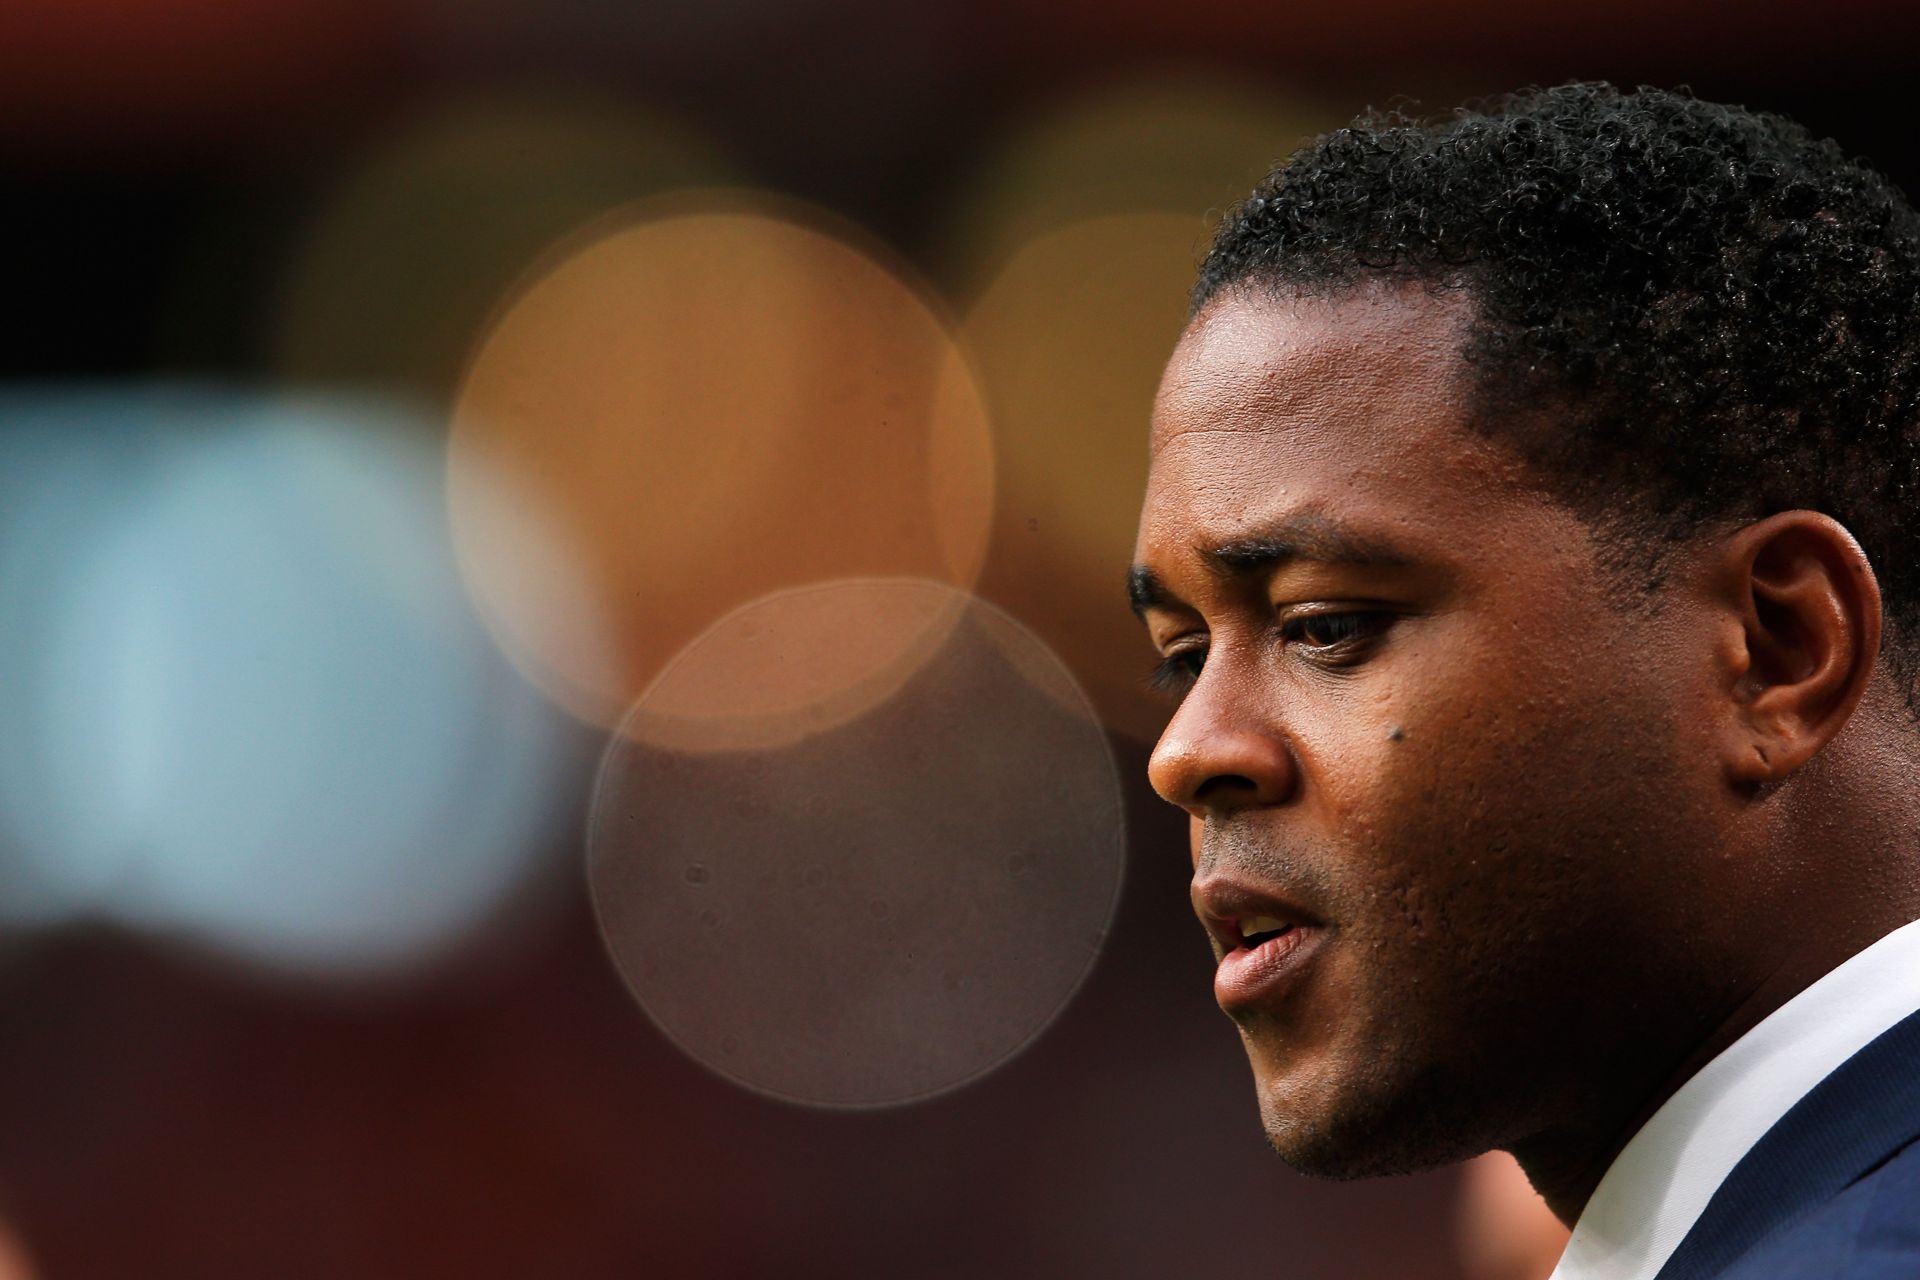 Dutch legend Patrick Kluivert pictured ahead of a game.